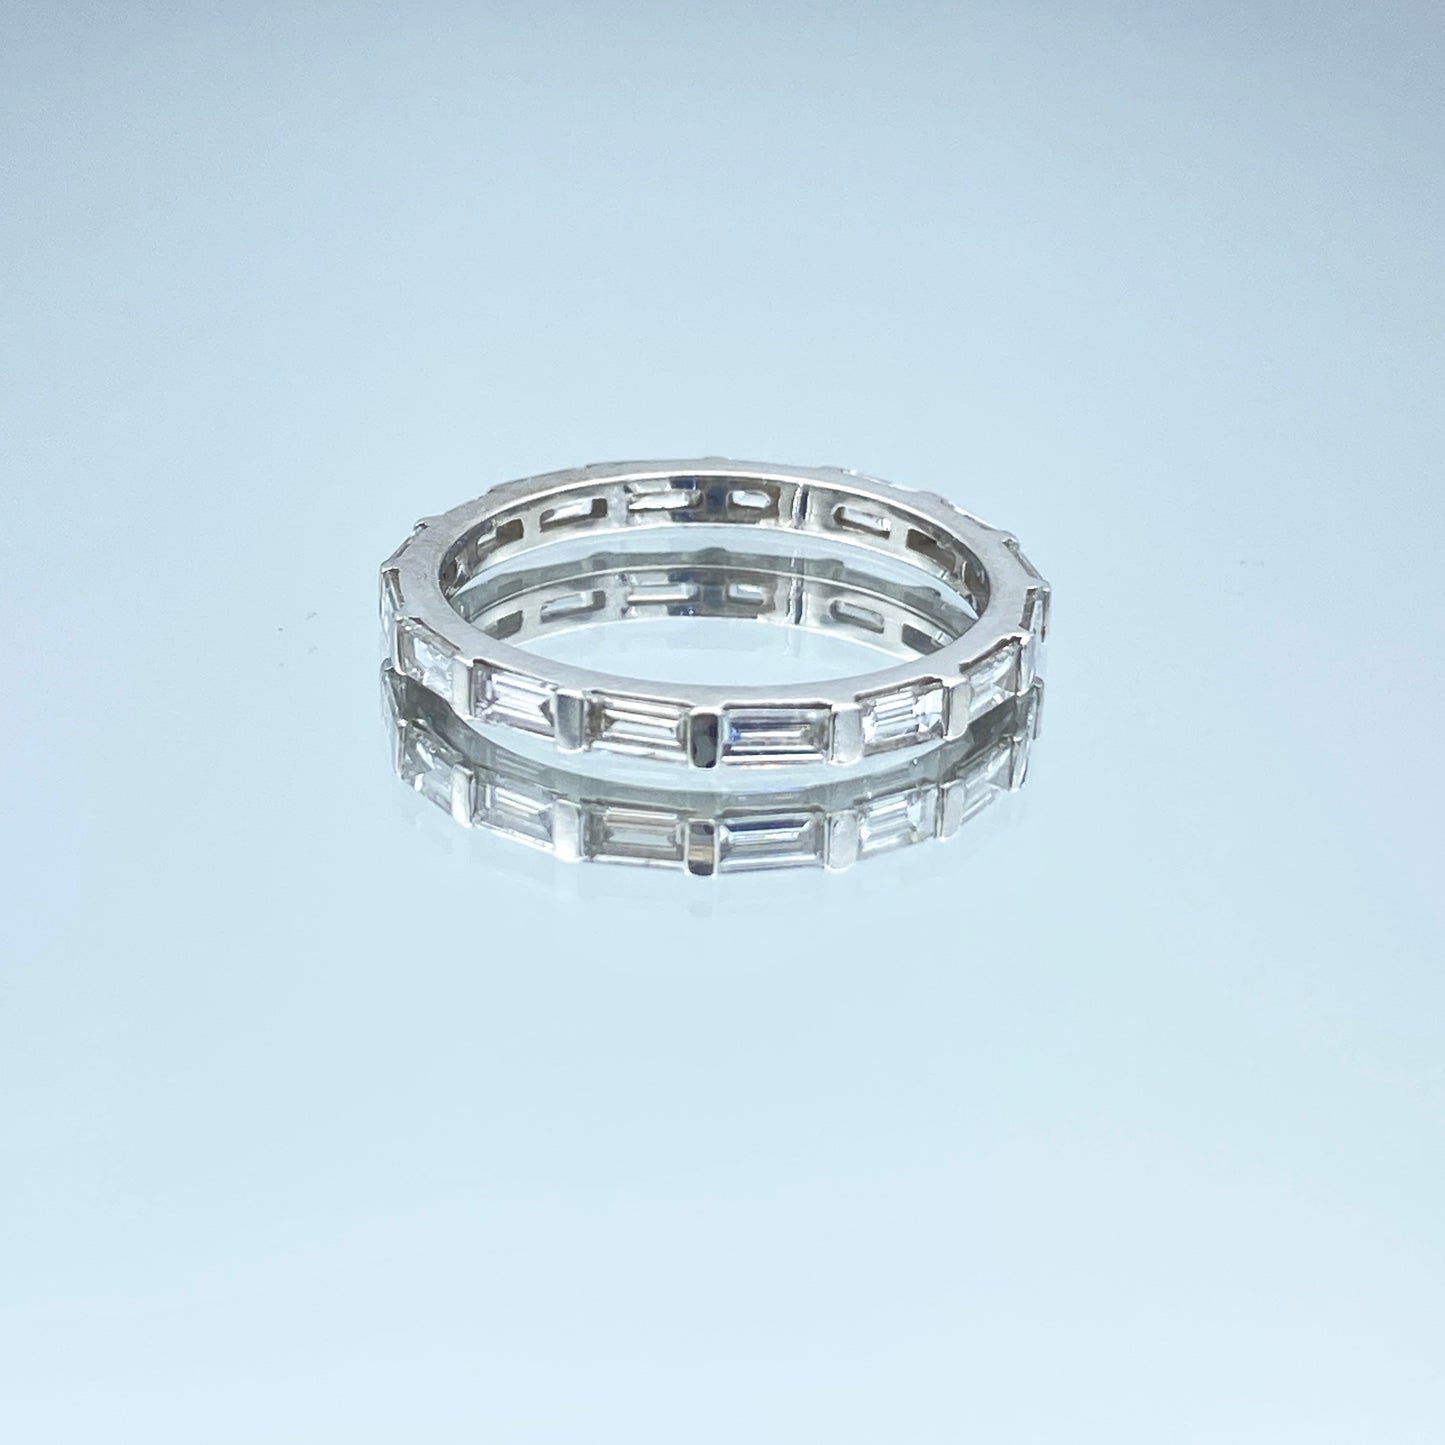 Baguette-Cut Diamond Eternity Ring in 14K White Gold - L and L Jewelry